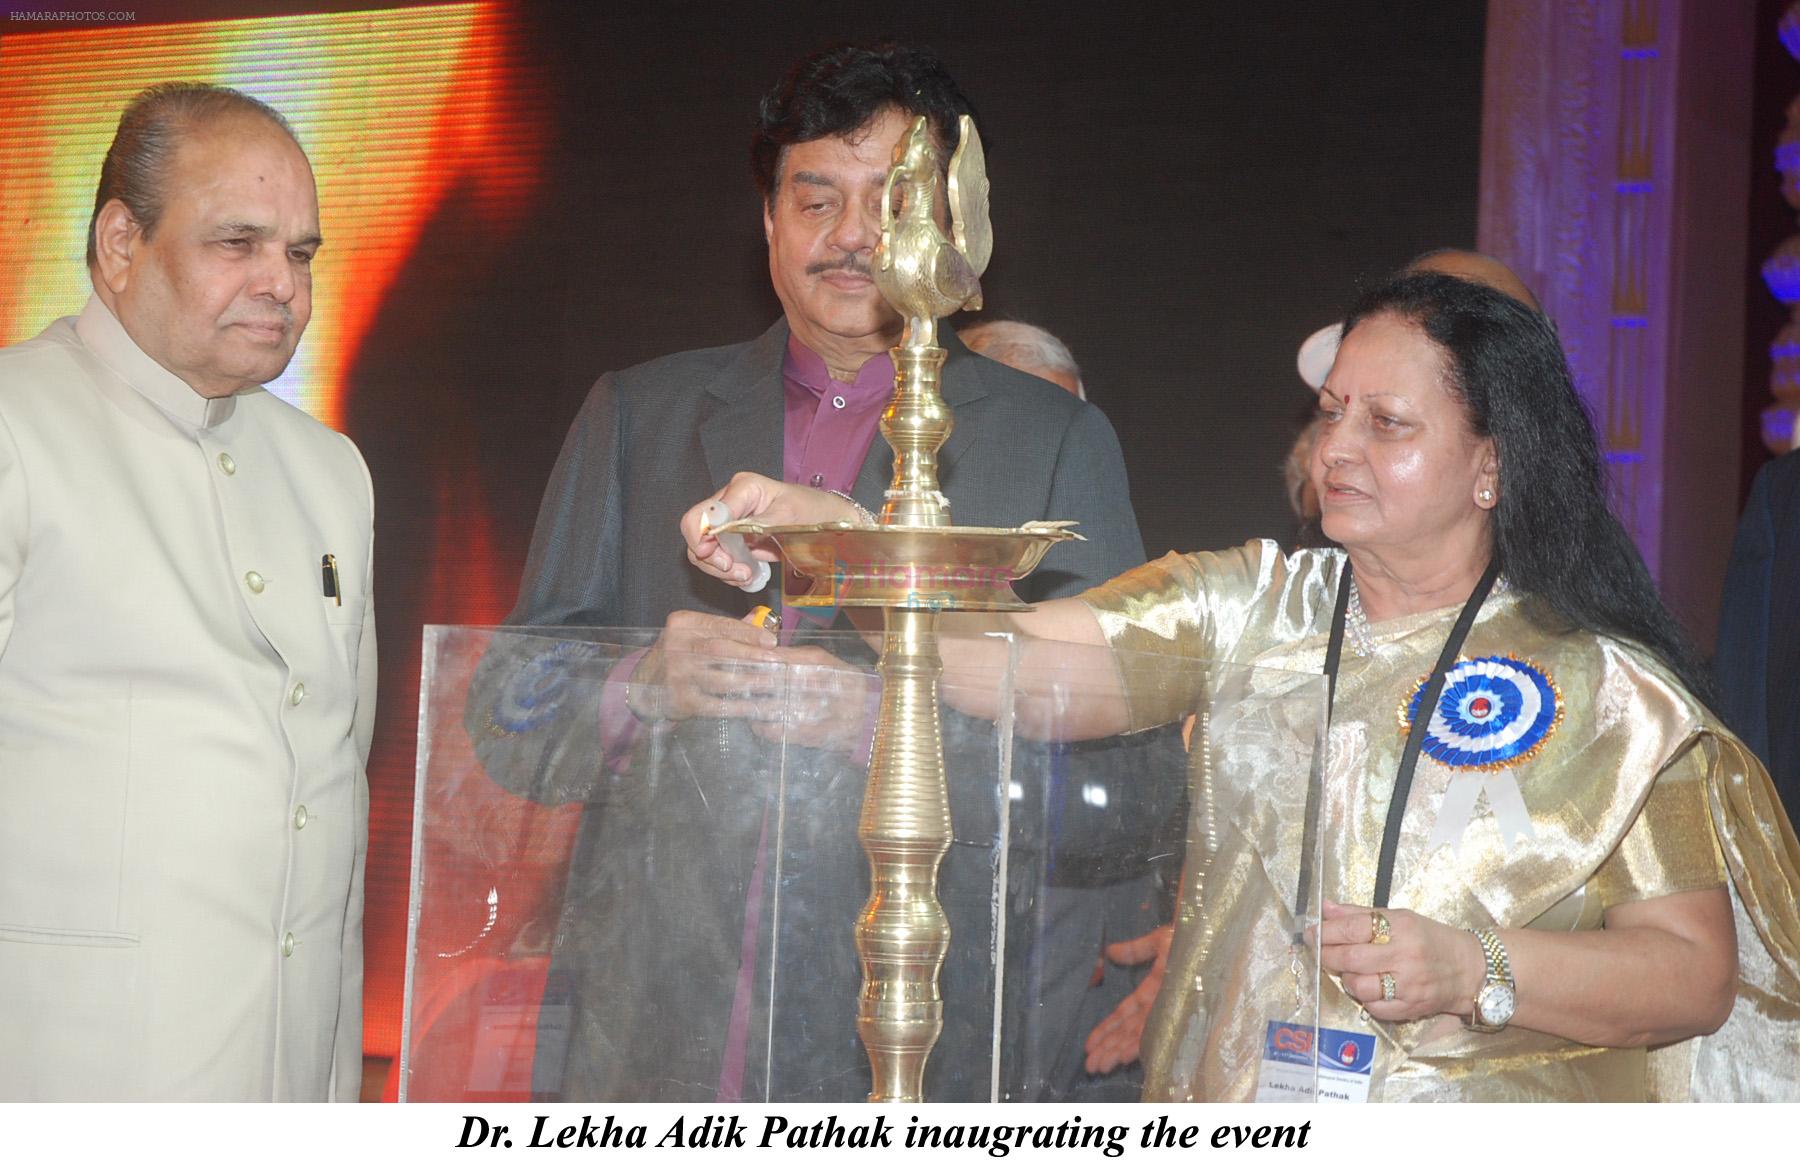 Dr Lekha Adik Pathak at the 63rd Annual Conference of Cardiological Society of India in NCPA complex, Mumbai on 9th Dec 2011